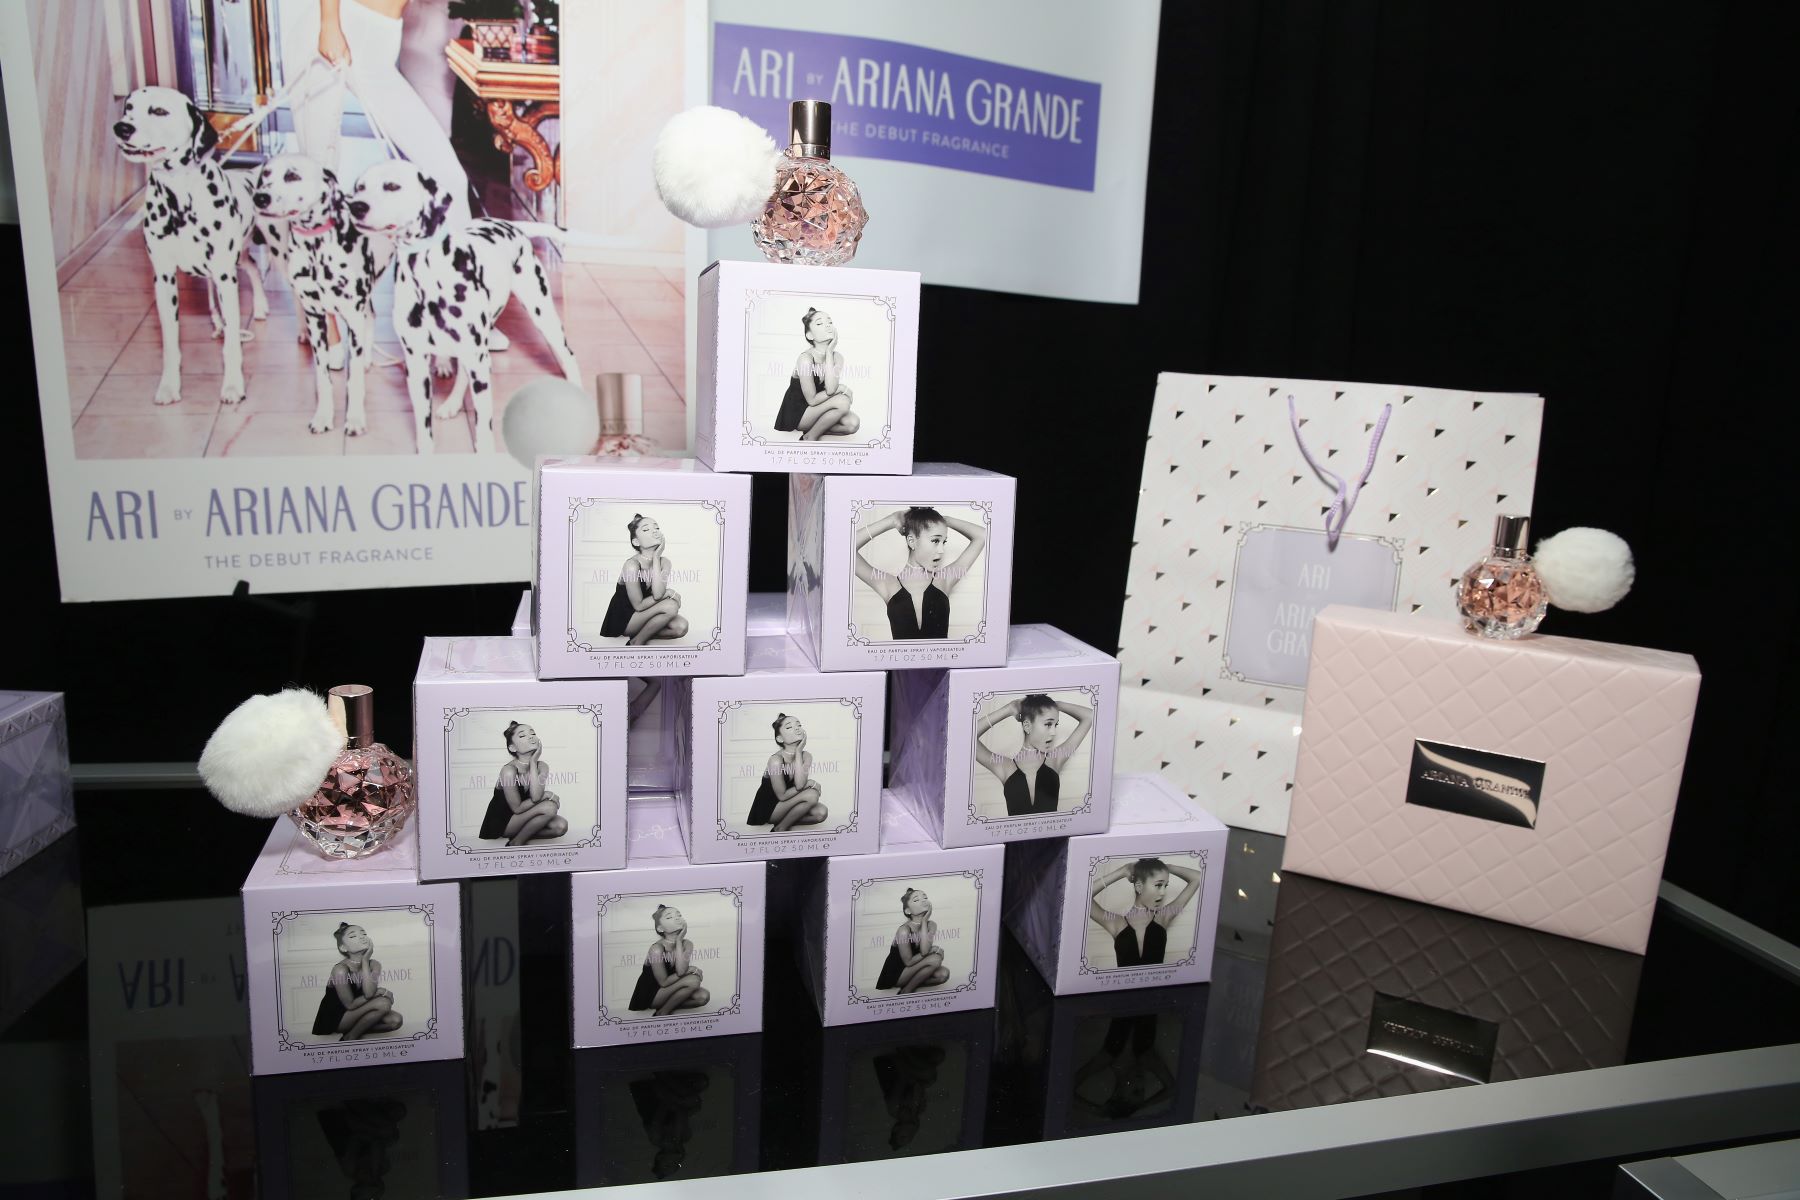 Ariana Grande’s 11 Fragrances Make Her the Most Popular Celebrity Selling Perfume